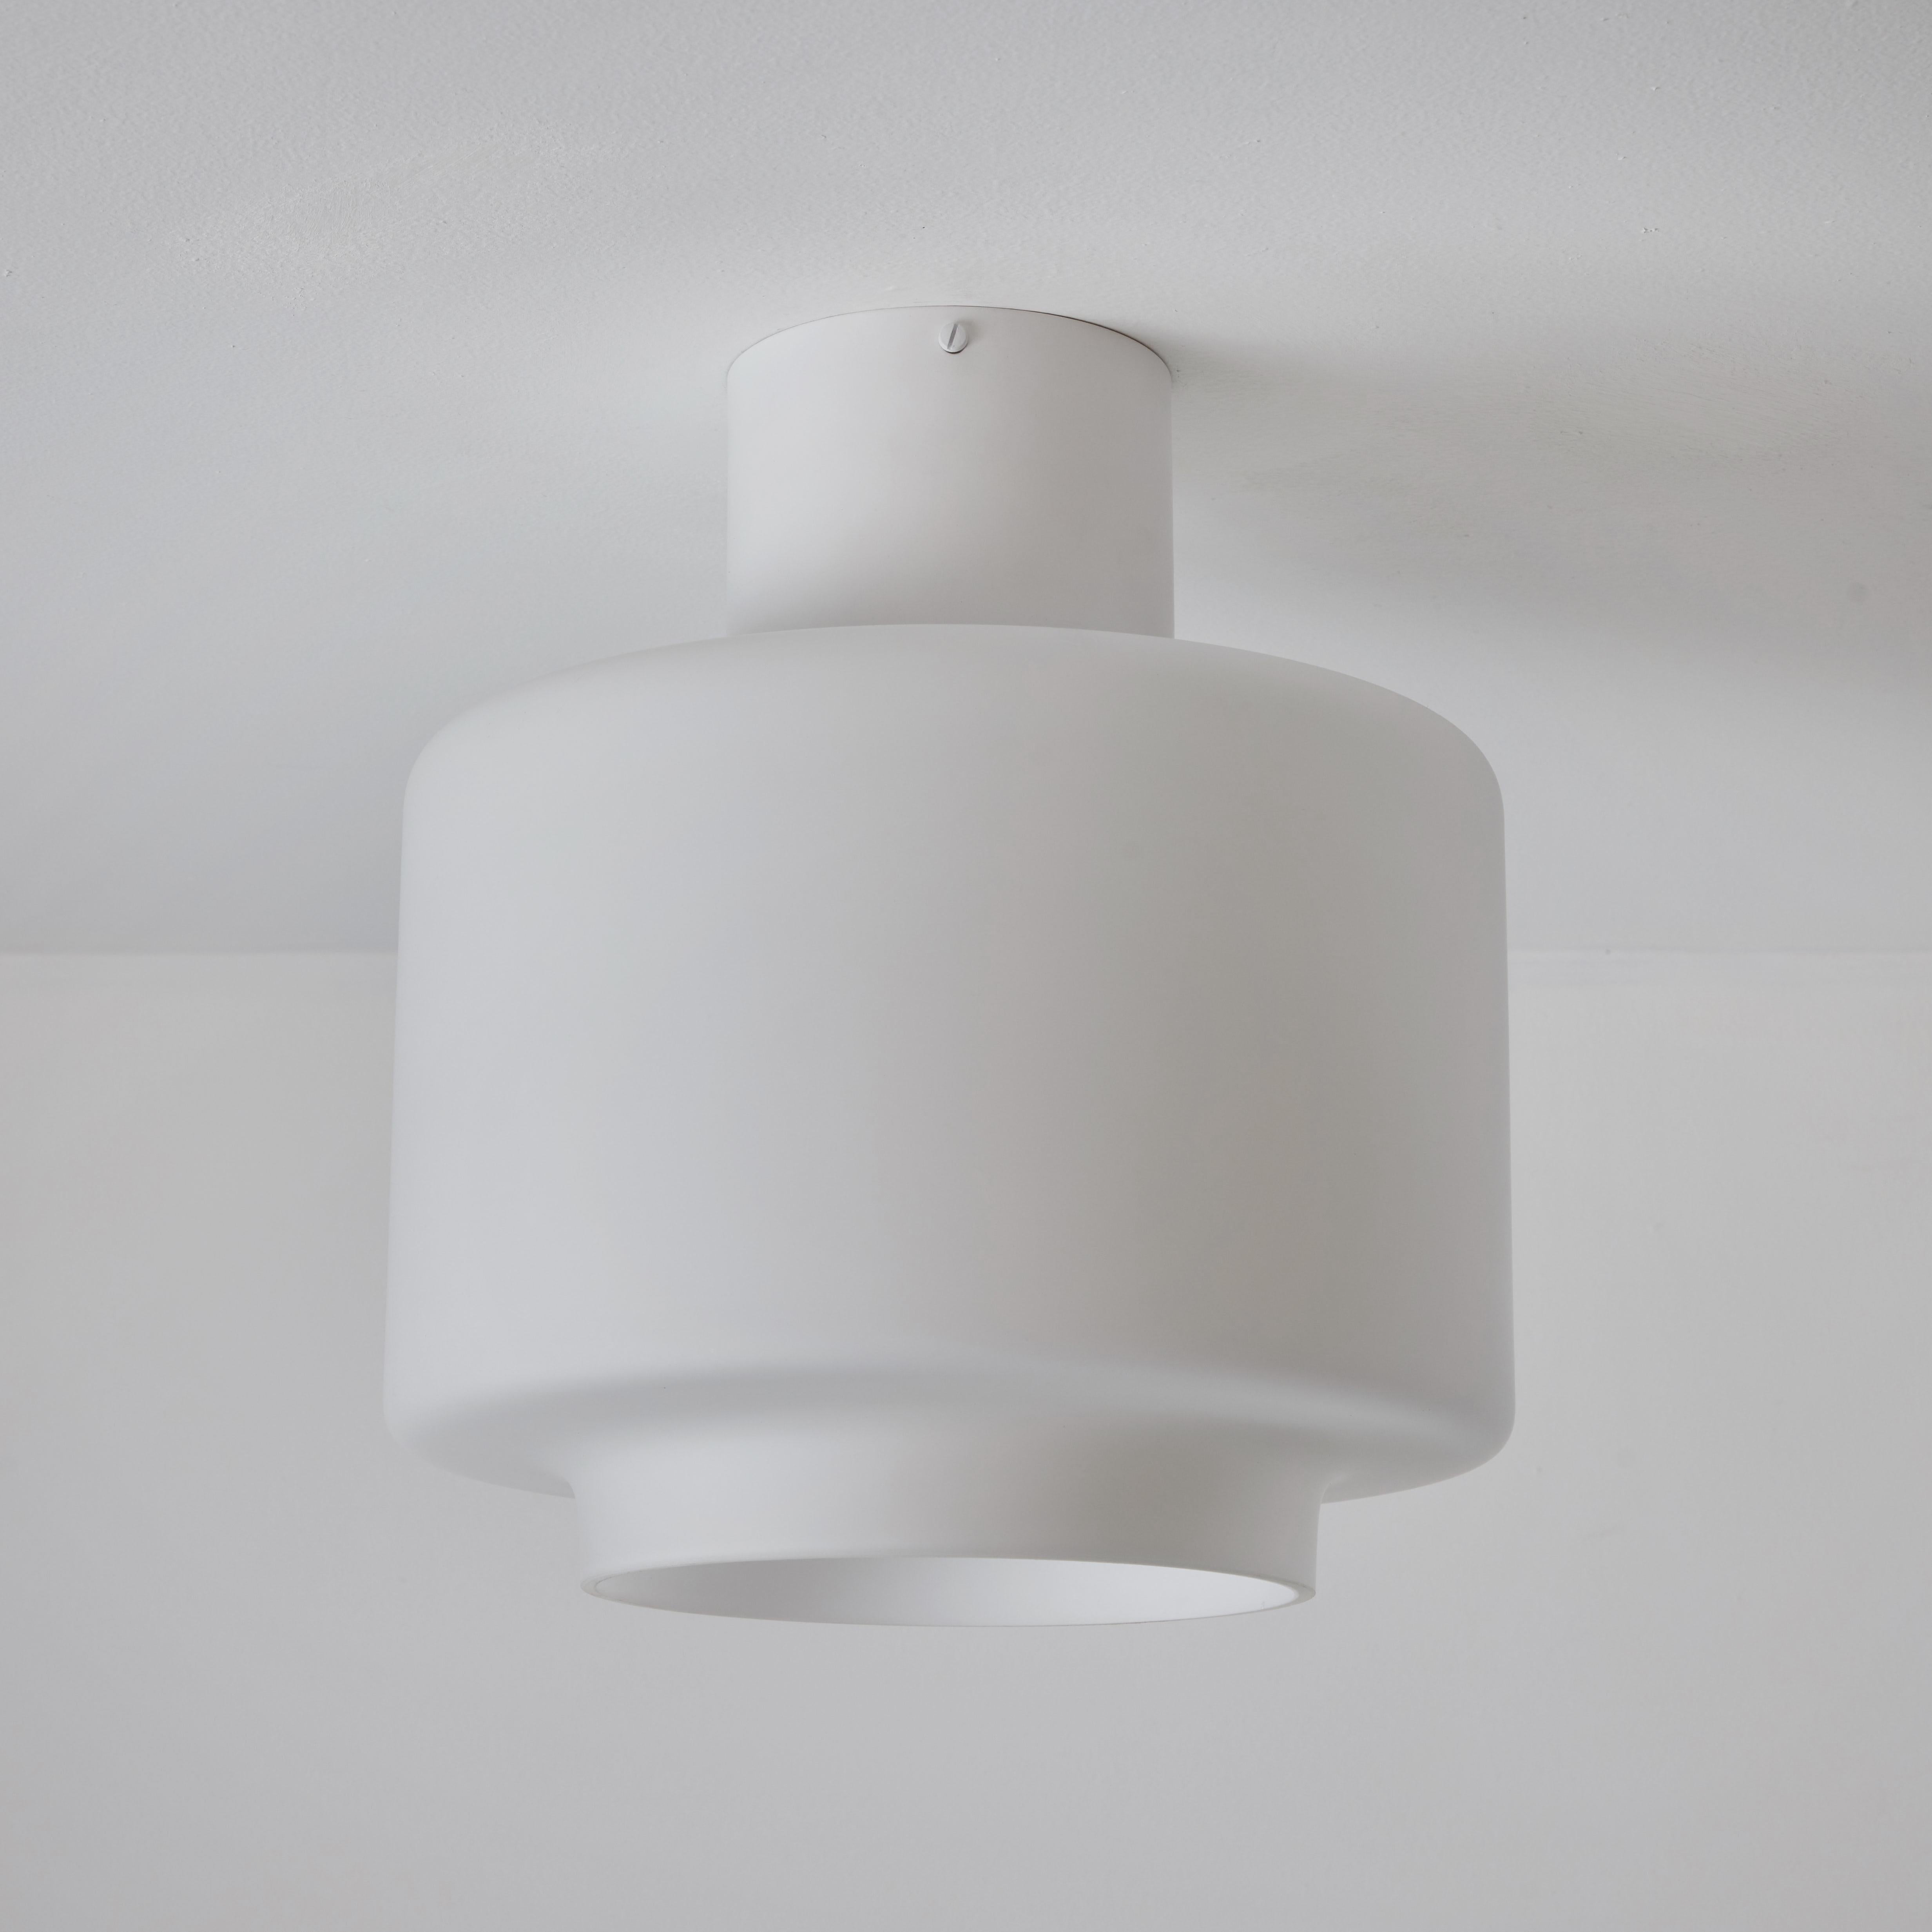 Mid-20th Century 1960s Mauri Almari Opaline Glass and White Metal 'AE 88' Ceiling Lamp for Itsu For Sale